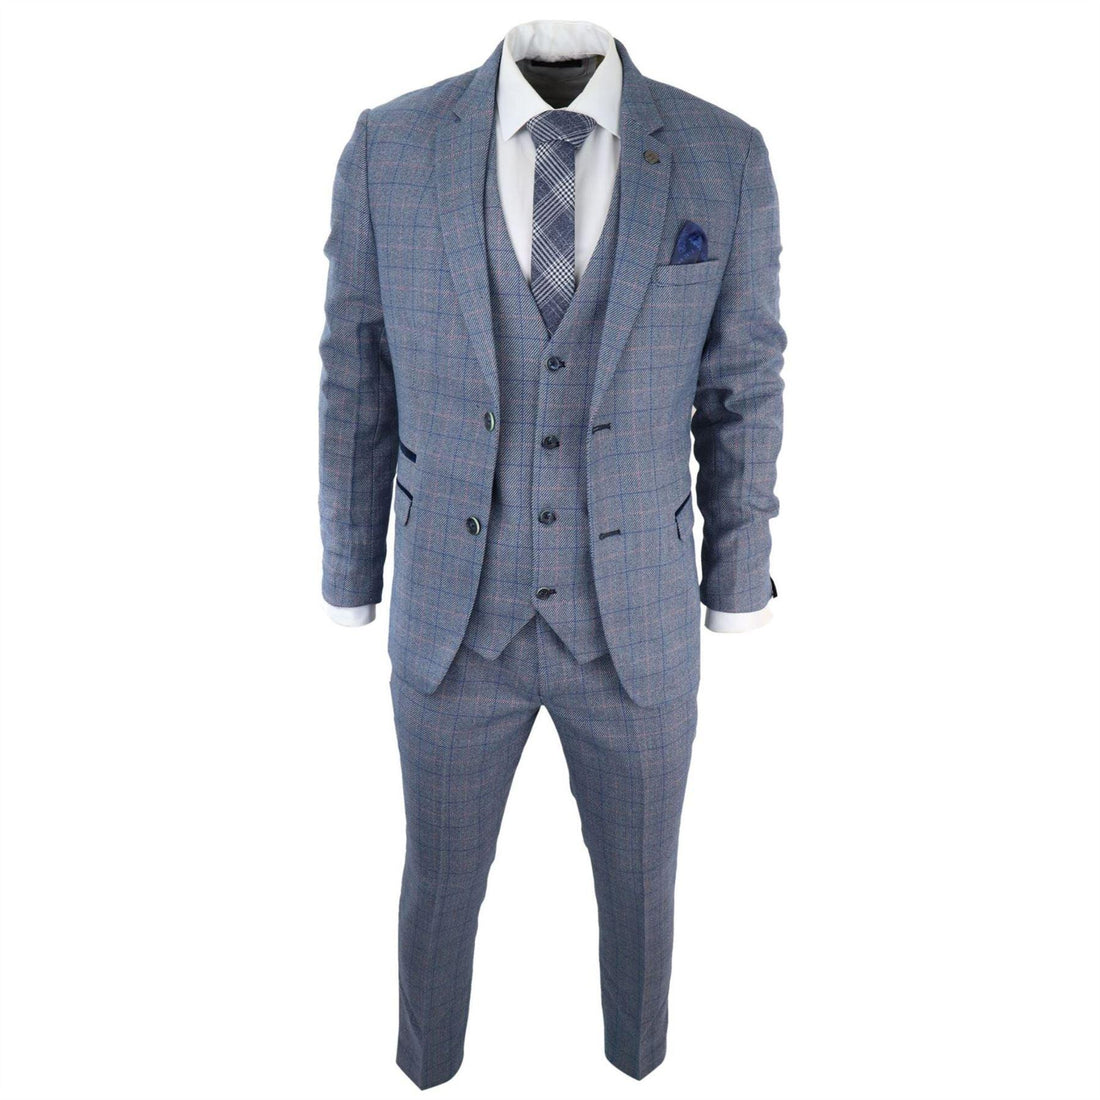 Mens 3 Piece Suit Sky Blue Check Wool Feel Marc Darcy Tailored Fit Wedding Prom Harry - Knighthood Store